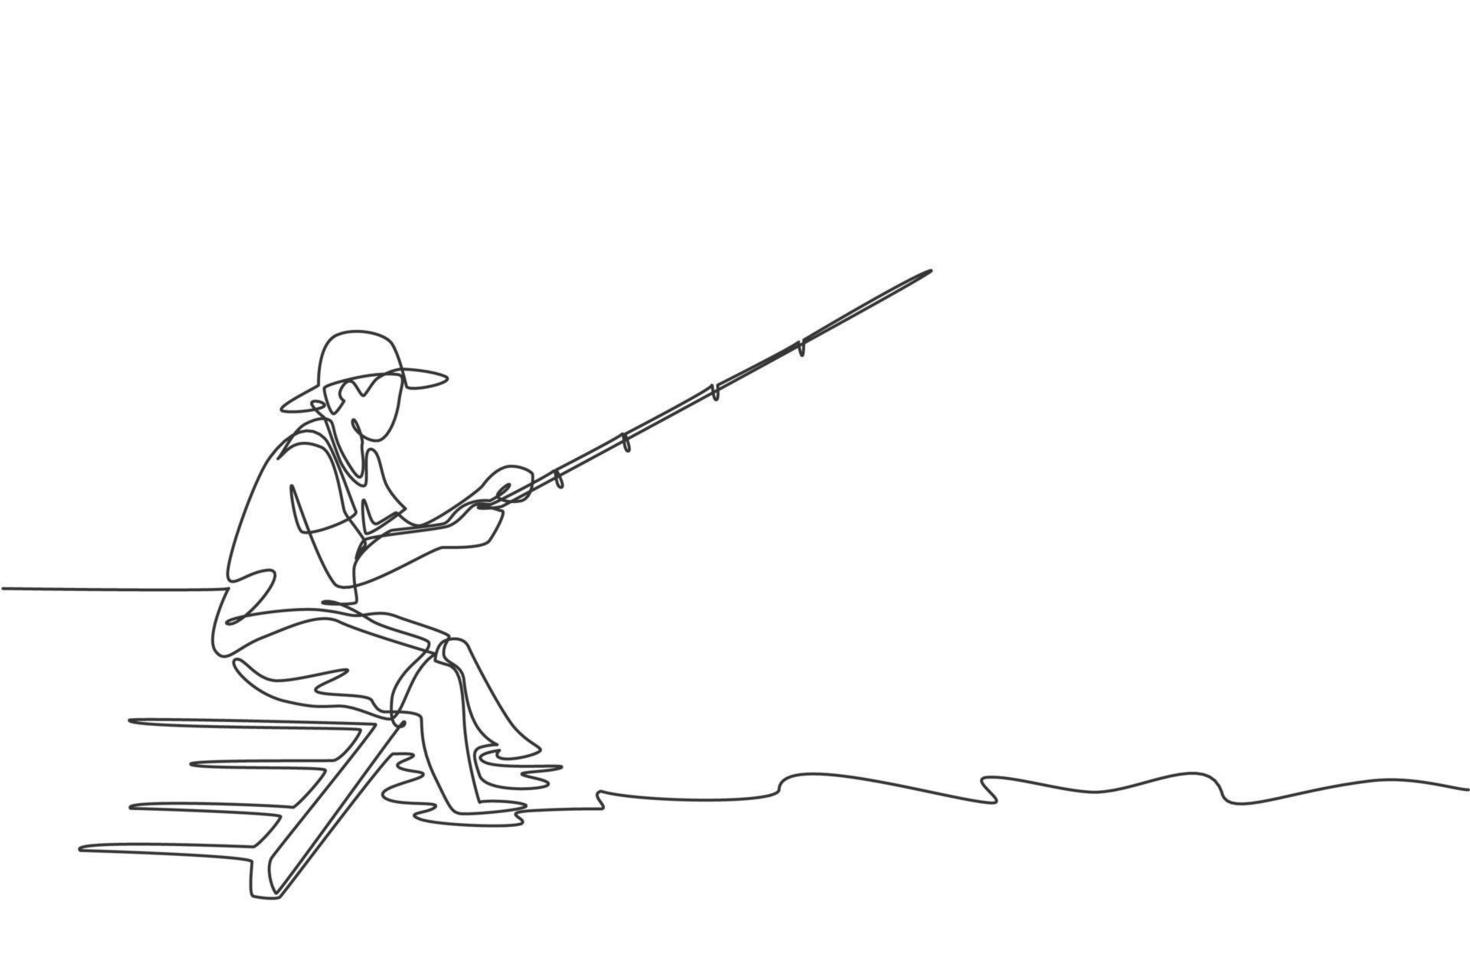 https://static.vecteezy.com/system/resources/previews/007/767/128/non_2x/one-single-line-drawing-young-happy-fisher-man-siting-on-wooden-pier-and-fishing-peacefully-graphic-illustration-holiday-traveling-for-fishing-hobby-concept-modern-continuous-line-draw-design-vector.jpg